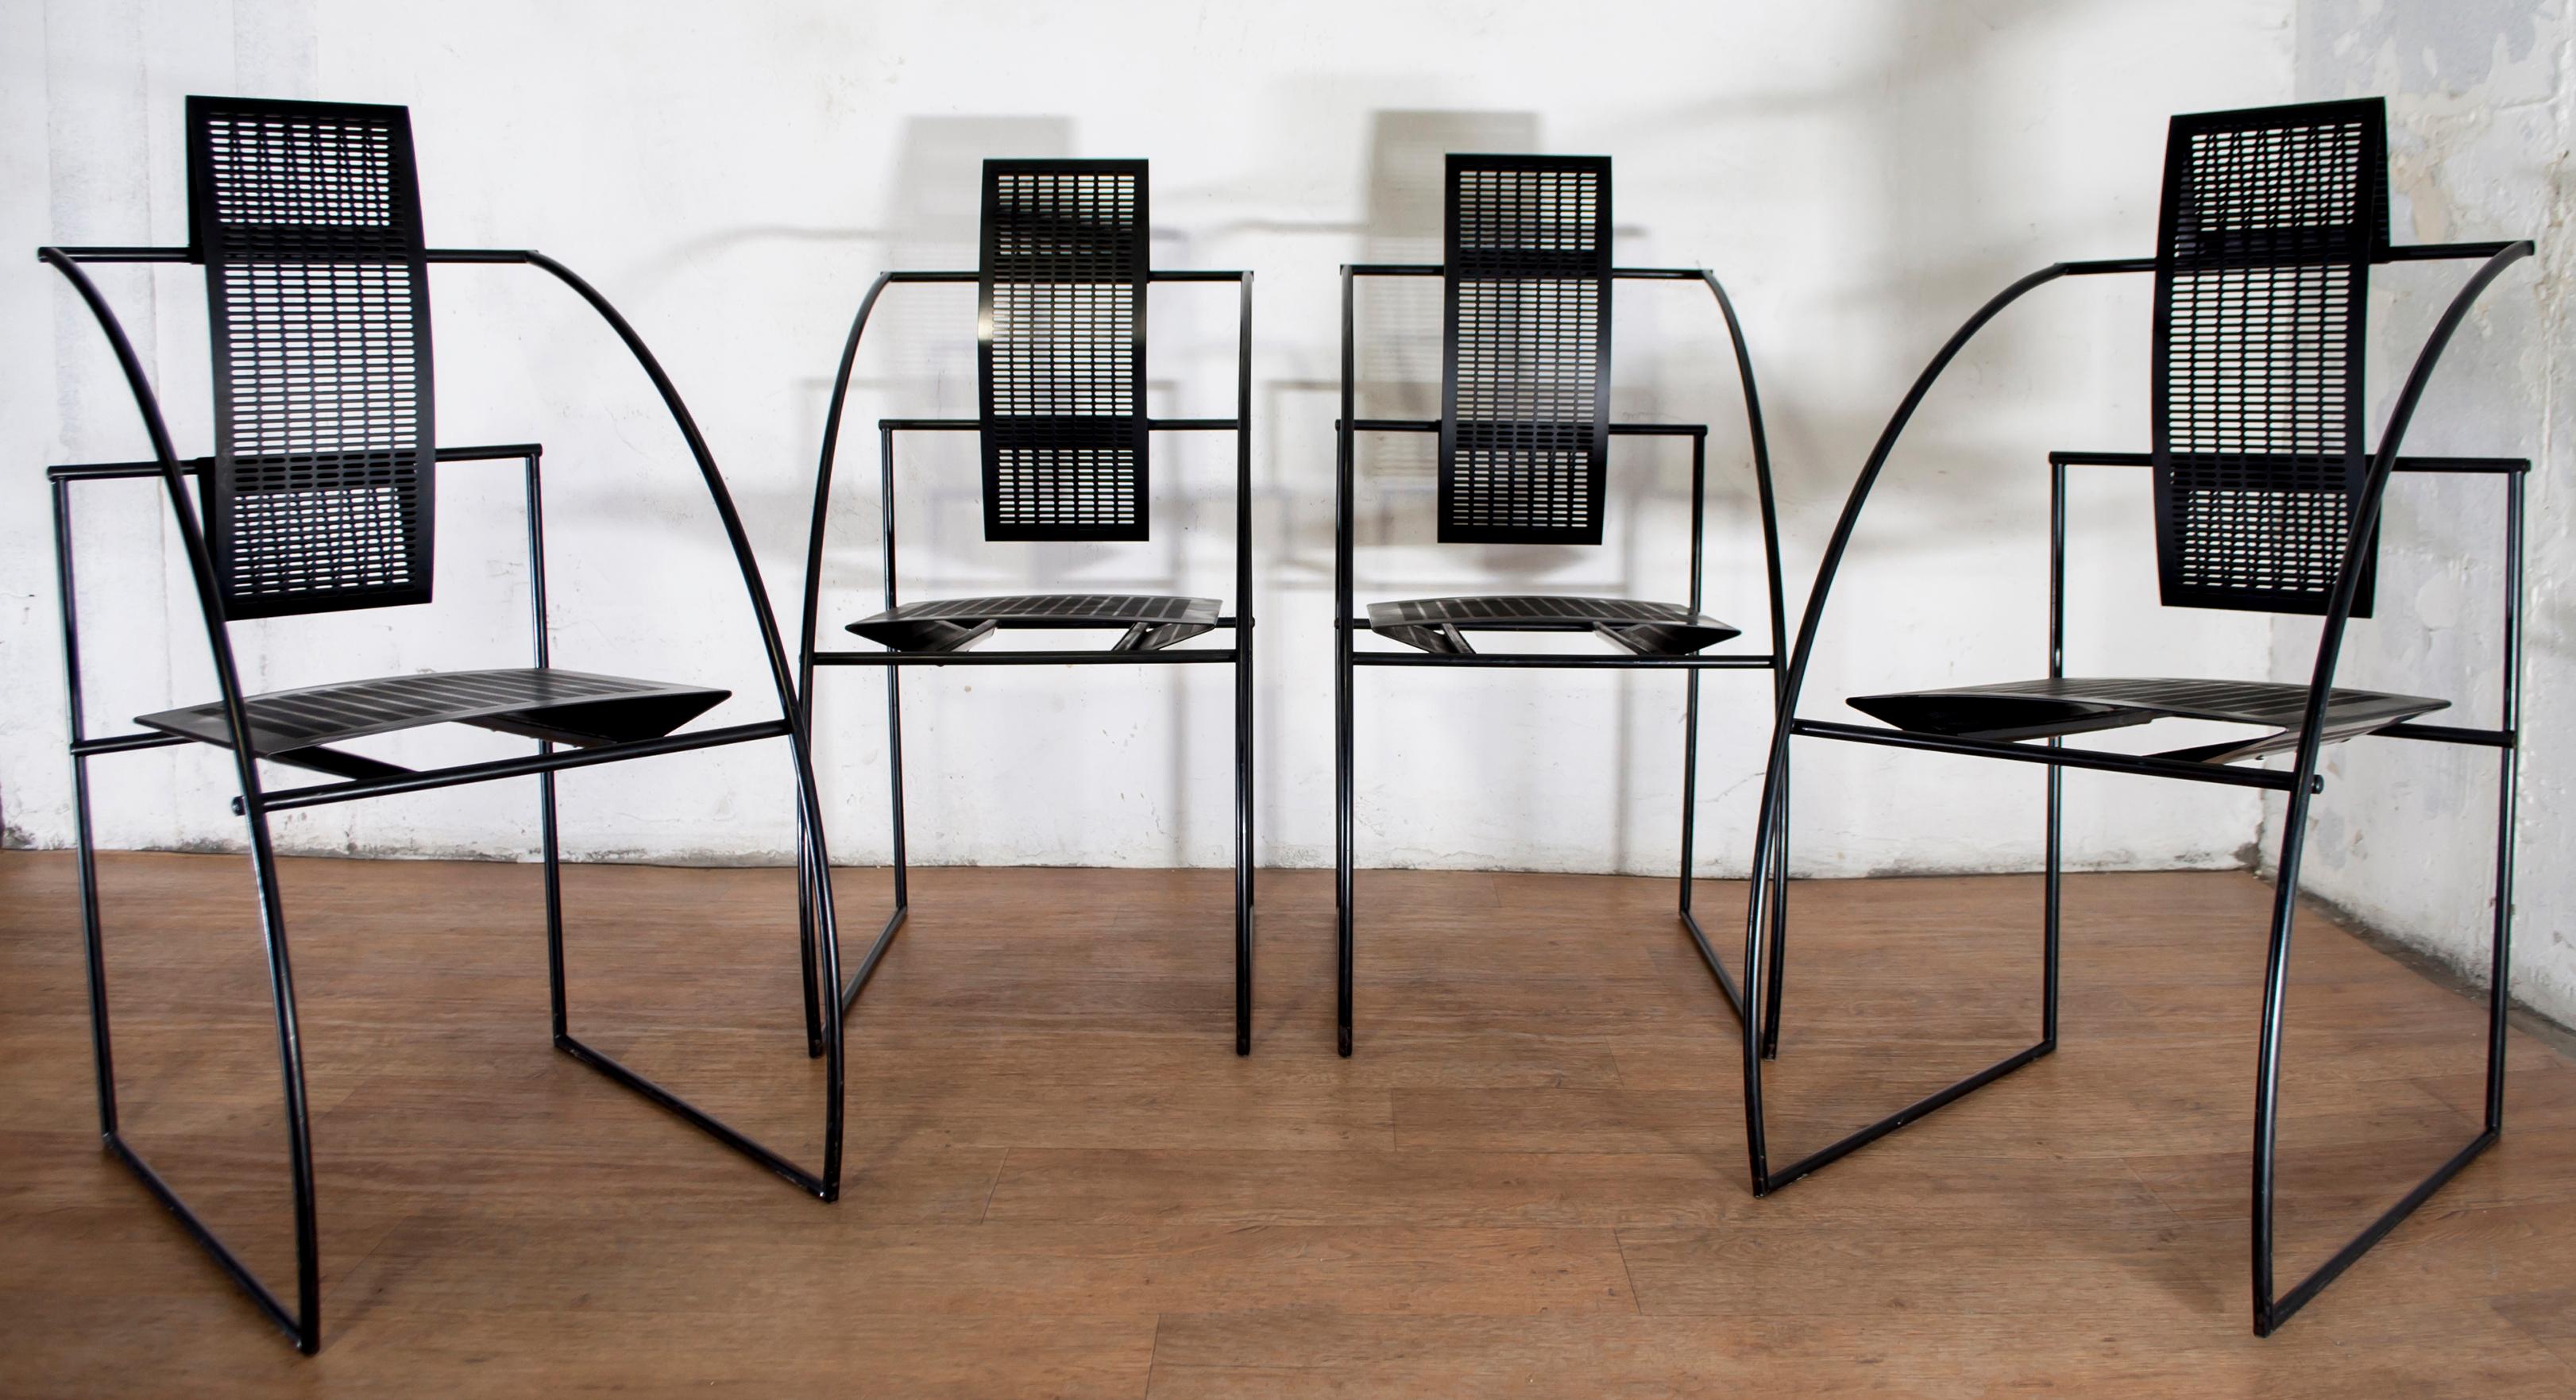 These four chairs were designed by the Italian architect Mario Botta. The Quinta chair is built with a steel rod frame, and seat and back in bent perforated sheet metal.

Mario Botta
He was born in Mendrisio in 1943. He graduated from the